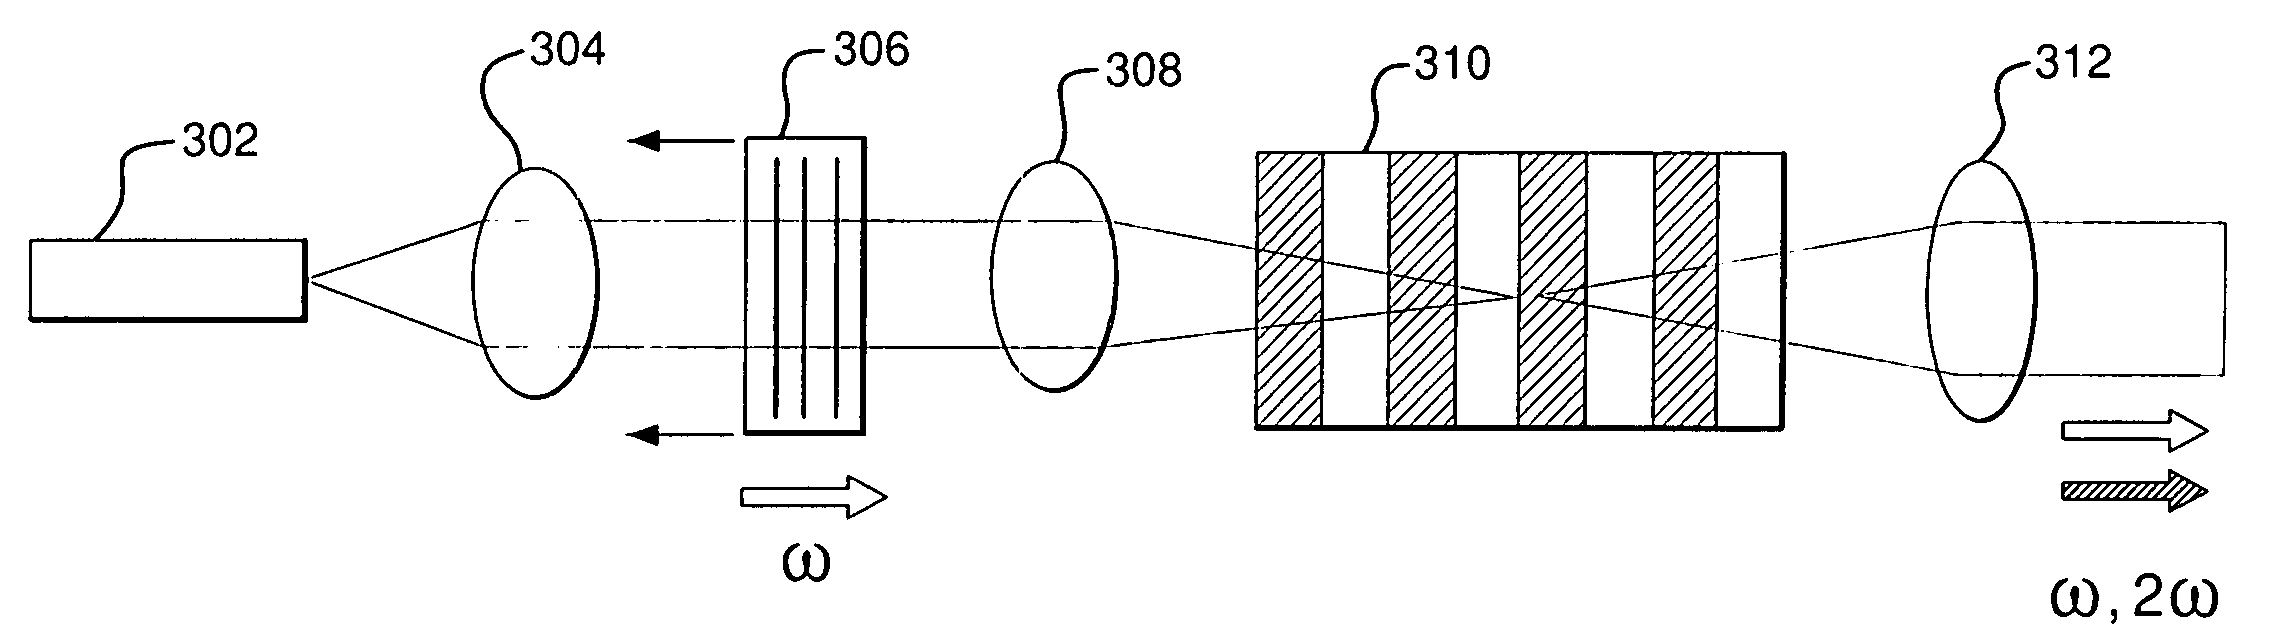 Apparatus and methods for altering a characteristic of light-emitting device